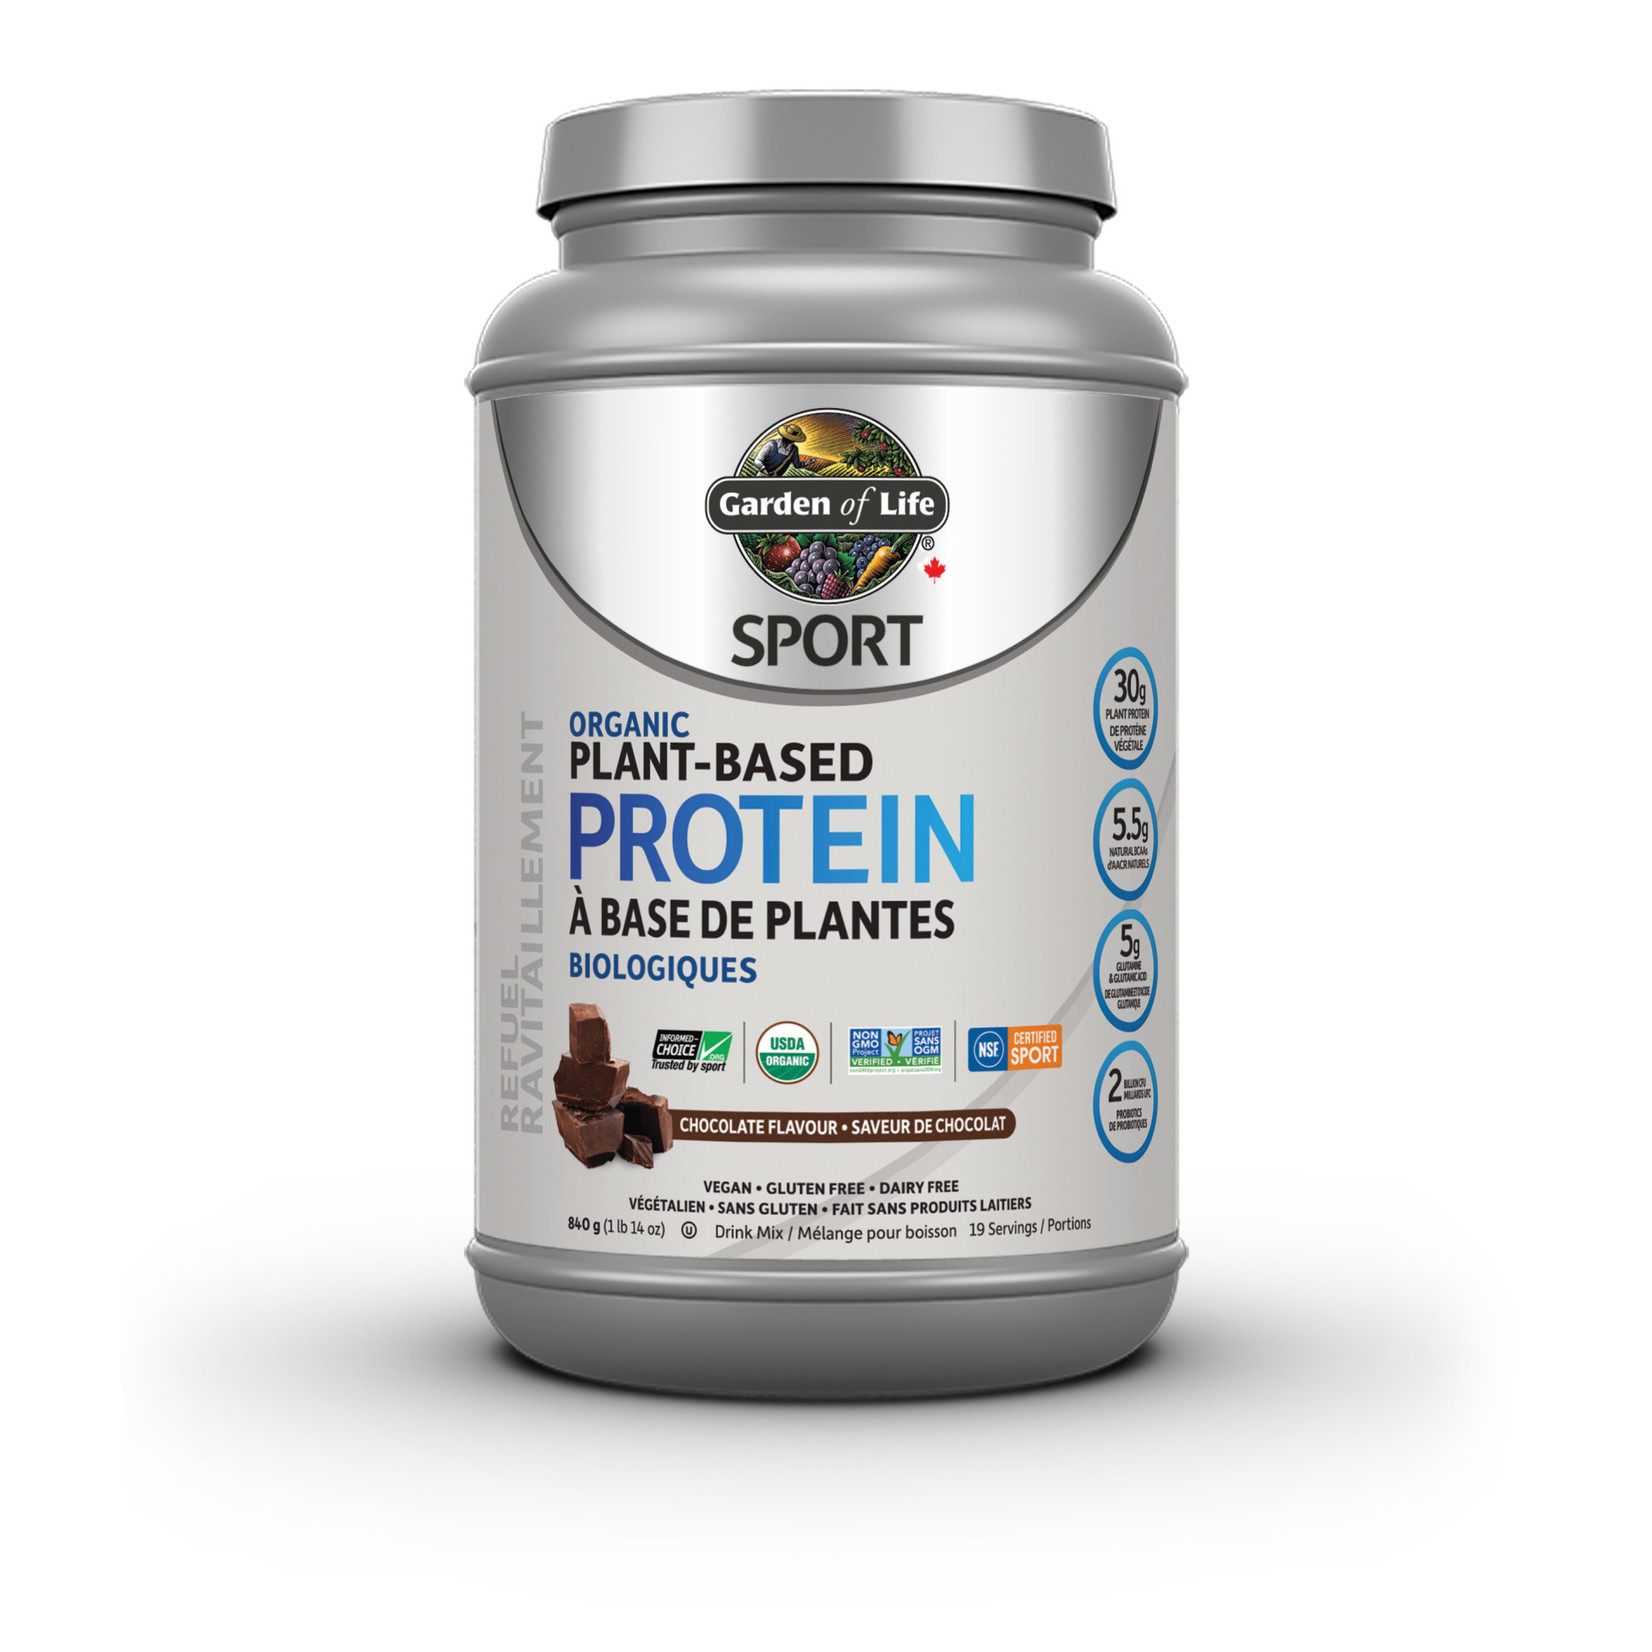 GARDEN OF LIFE GARDEN OF LIFE SPORT ORGANIC PLANT BASED PROTEIN CHOCOLATE 840g